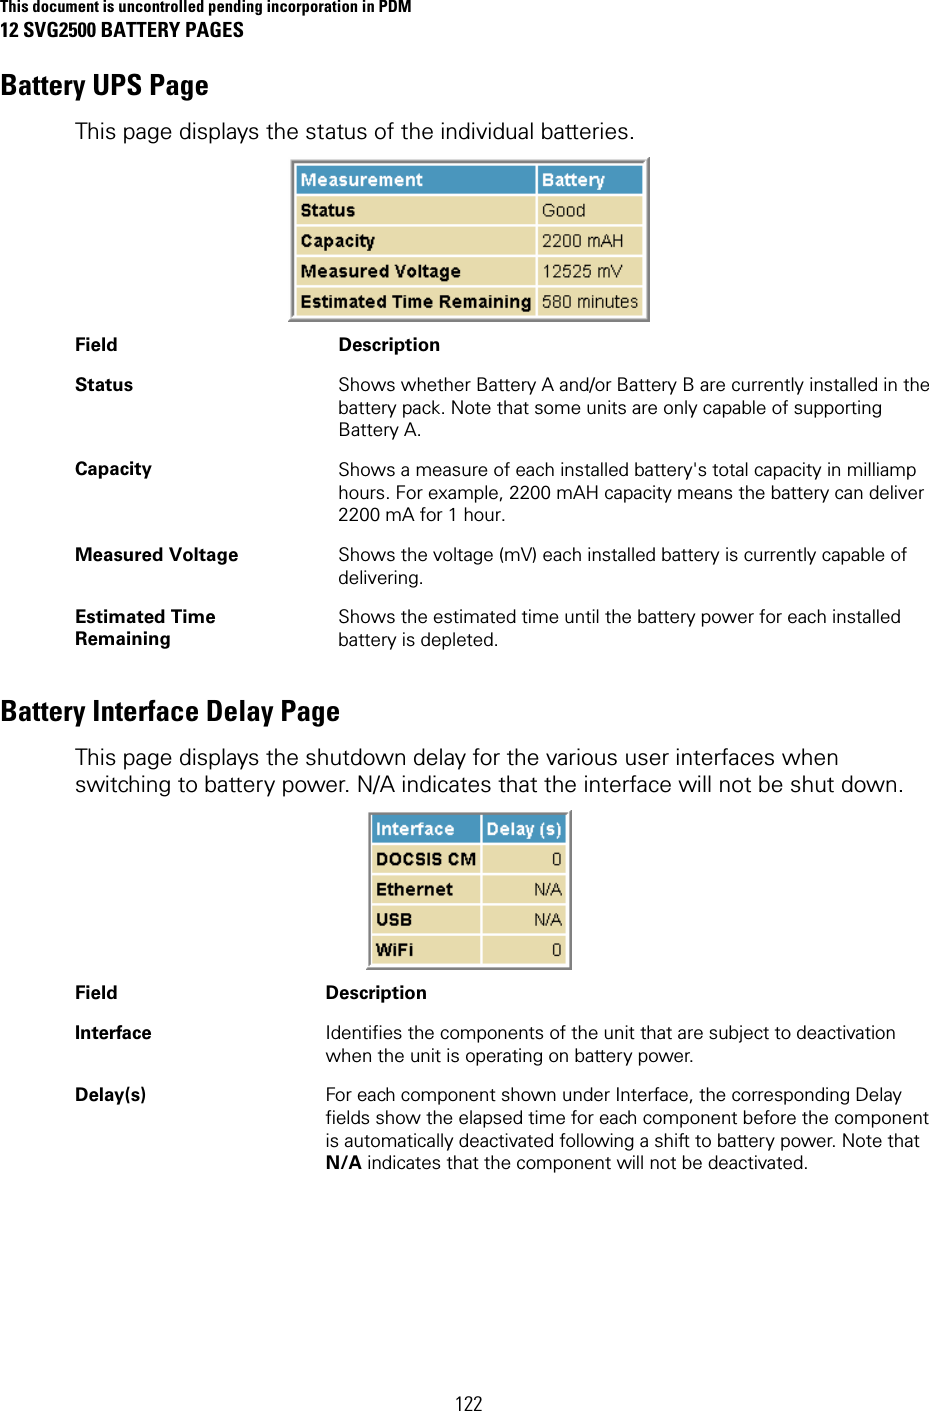 This document is uncontrolled pending incorporation in PDM 12 SVG2500 BATTERY PAGES 122 Battery UPS Page This page displays the status of the individual batteries.  Field Description Status  Shows whether Battery A and/or Battery B are currently installed in the battery pack. Note that some units are only capable of supporting Battery A. Capacity  Shows a measure of each installed battery&apos;s total capacity in milliamp hours. For example, 2200 mAH capacity means the battery can deliver 2200 mA for 1 hour. Measured Voltage  Shows the voltage (mV) each installed battery is currently capable of delivering. Estimated Time Remaining Shows the estimated time until the battery power for each installed battery is depleted. Battery Interface Delay Page This page displays the shutdown delay for the various user interfaces when switching to battery power. N/A indicates that the interface will not be shut down.  Field Description Interface  Identifies the components of the unit that are subject to deactivation when the unit is operating on battery power. Delay(s)  For each component shown under Interface, the corresponding Delay fields show the elapsed time for each component before the component is automatically deactivated following a shift to battery power. Note that N/A indicates that the component will not be deactivated. 